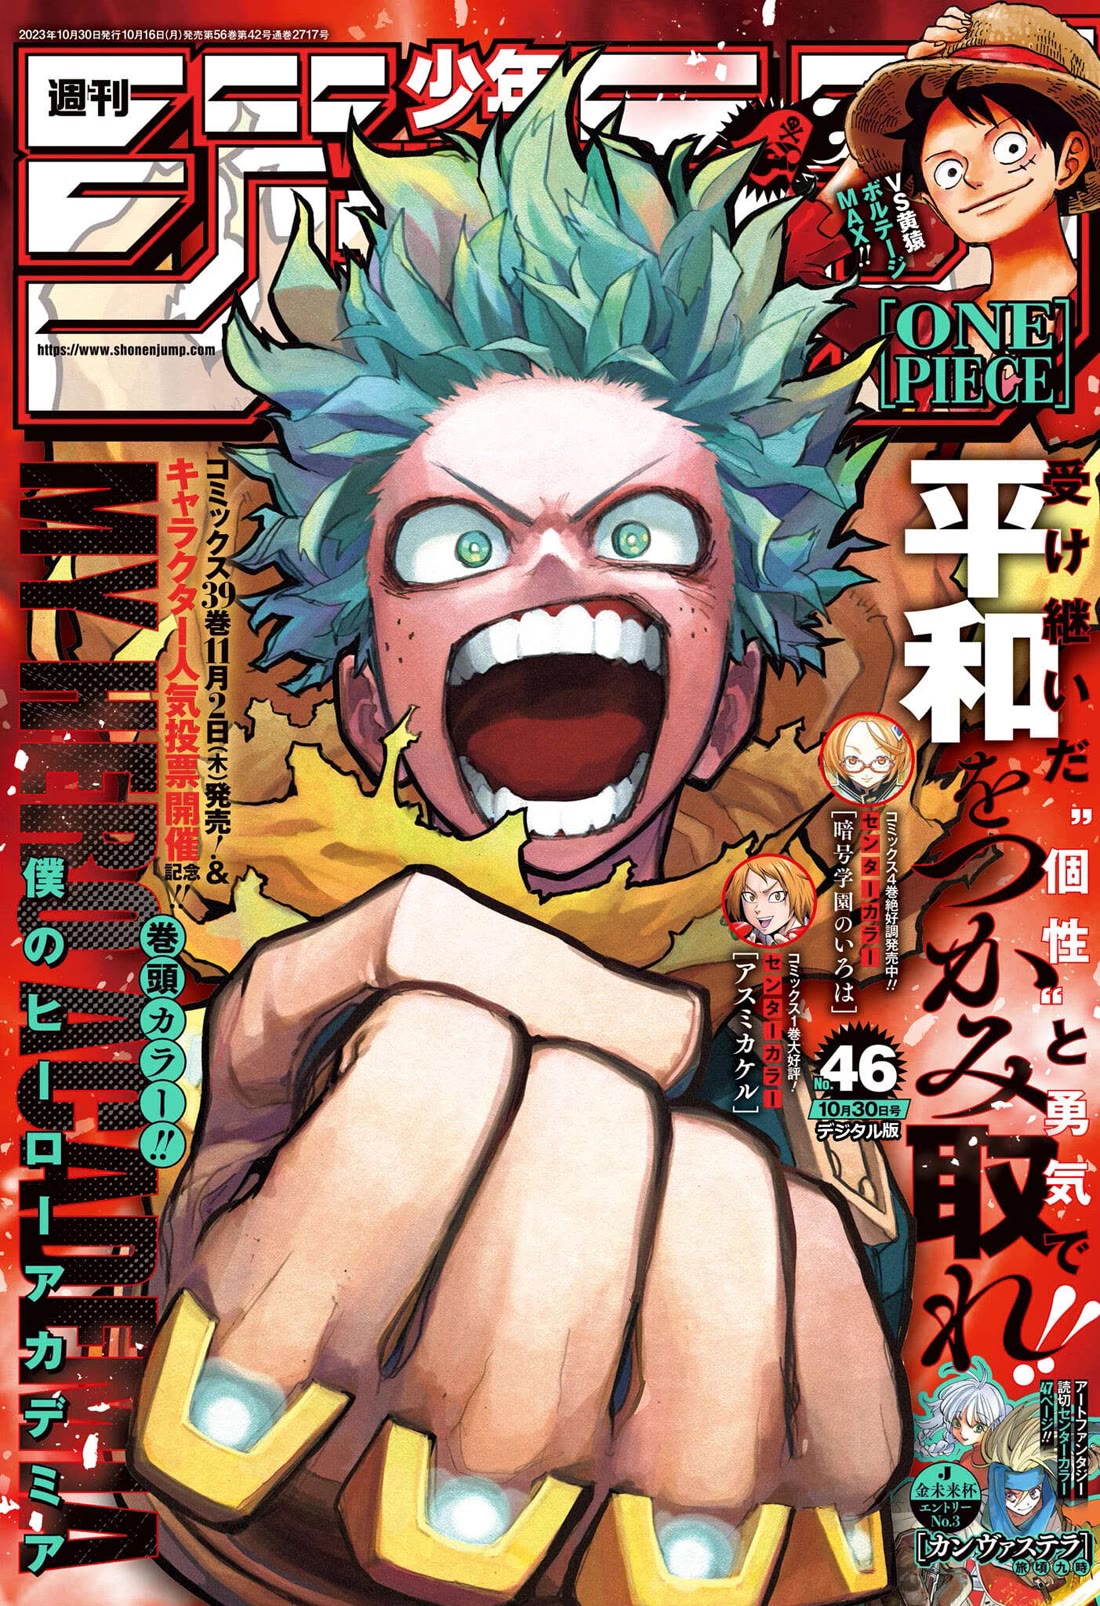 Chapter 402 Official Release - Links and Discussion : r/BokuNoHeroAcademia